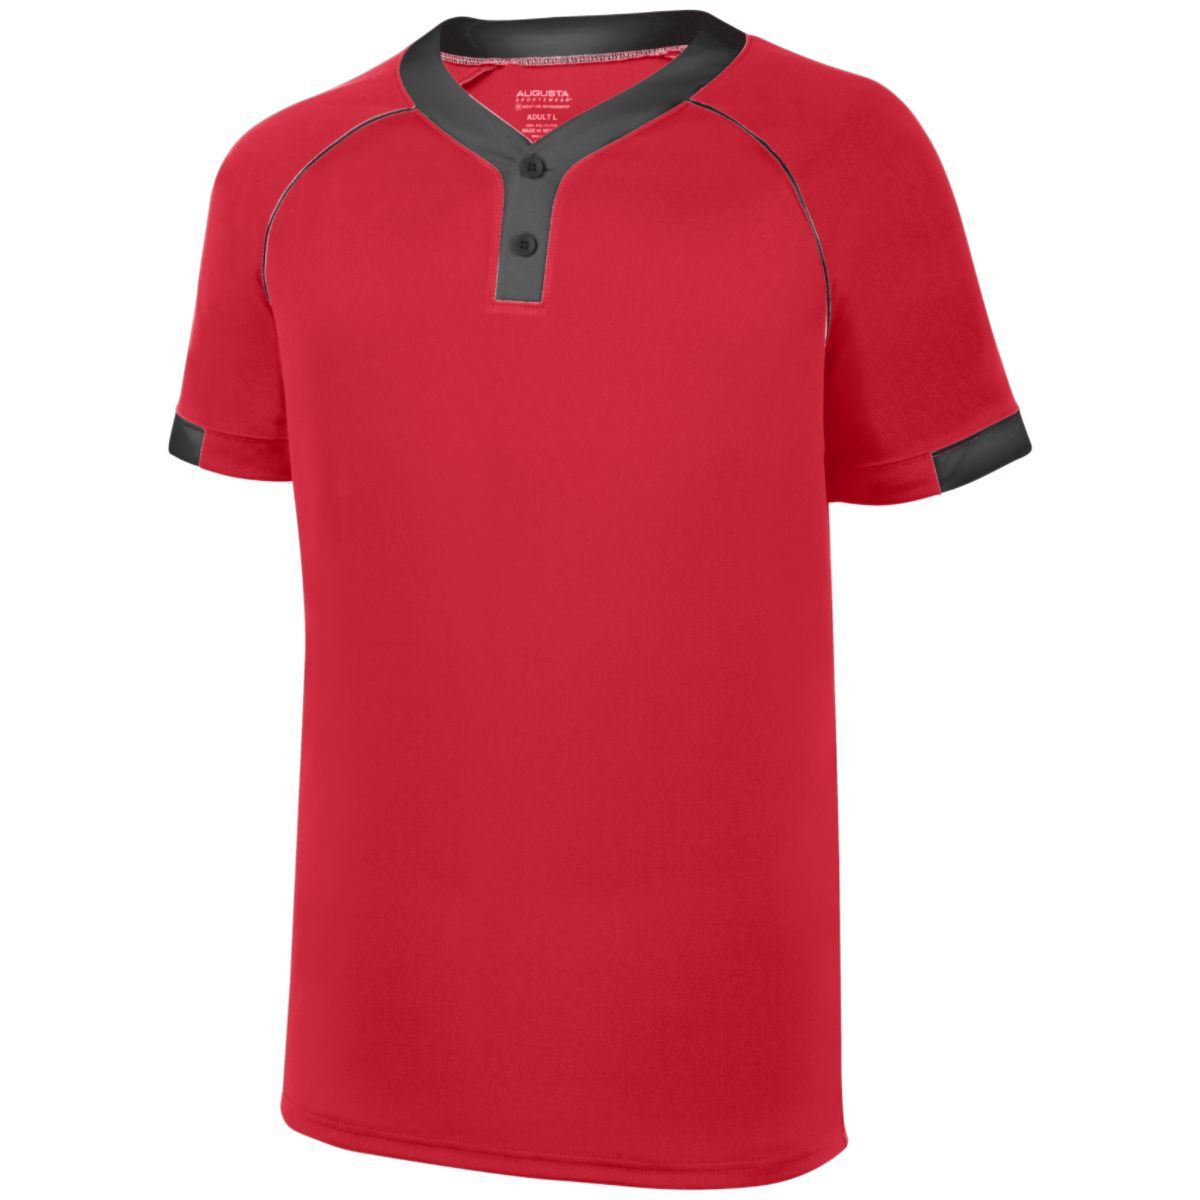 Augusta Sportswear Youth Stanza Jersey in Red/Black  -Part of the Youth, Youth-Jersey, Augusta-Products, Baseball, Shirts, All-Sports, All-Sports-1 product lines at KanaleyCreations.com